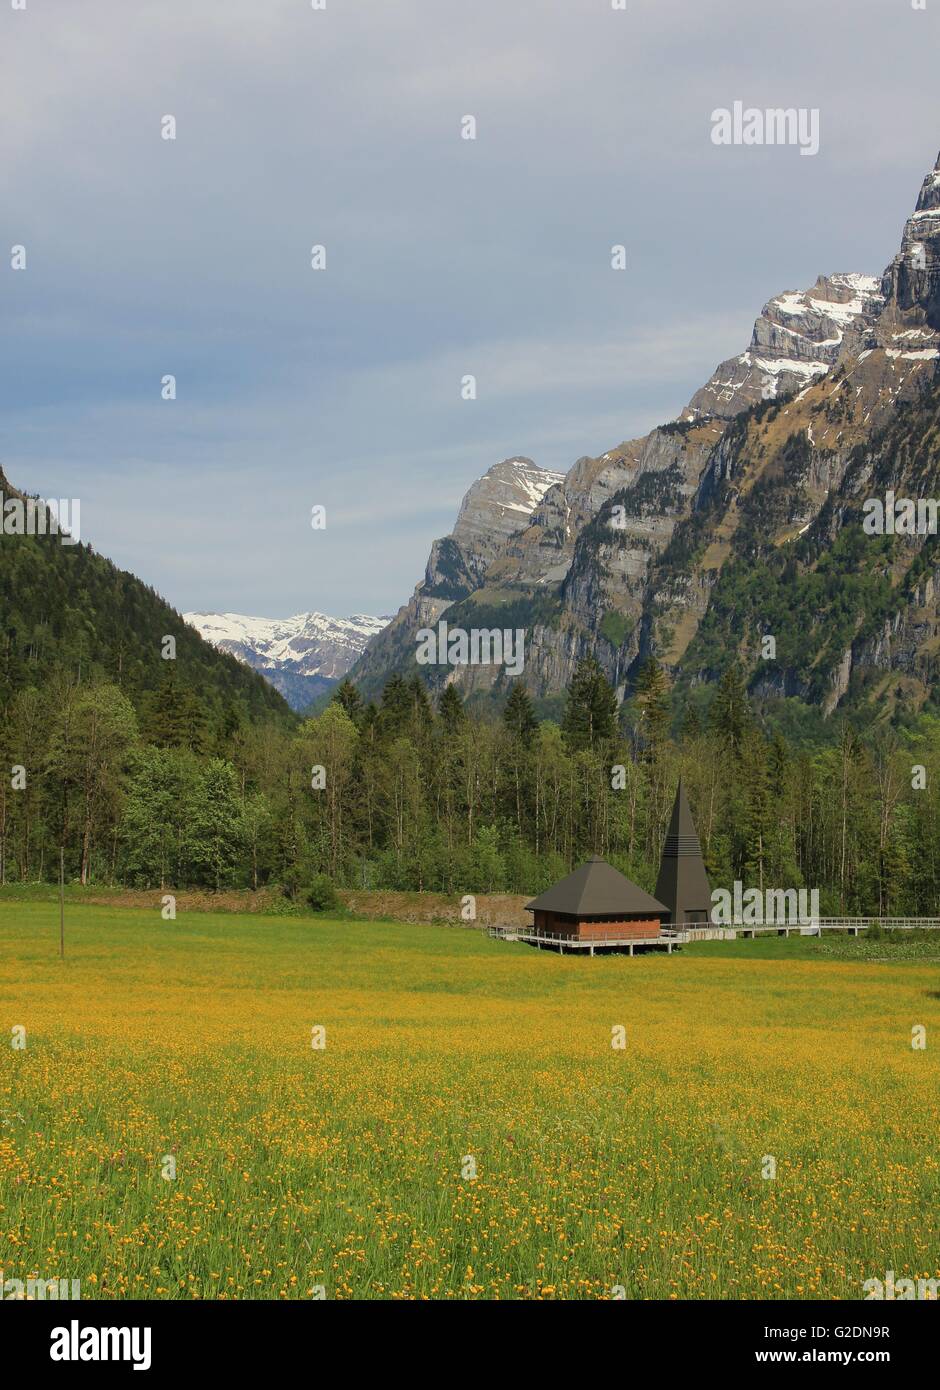 Meadow full of yellow wildflowers. High mountains of the Glaernisch. Modern church. Spring scene in the Swiss Alps. Stock Photo